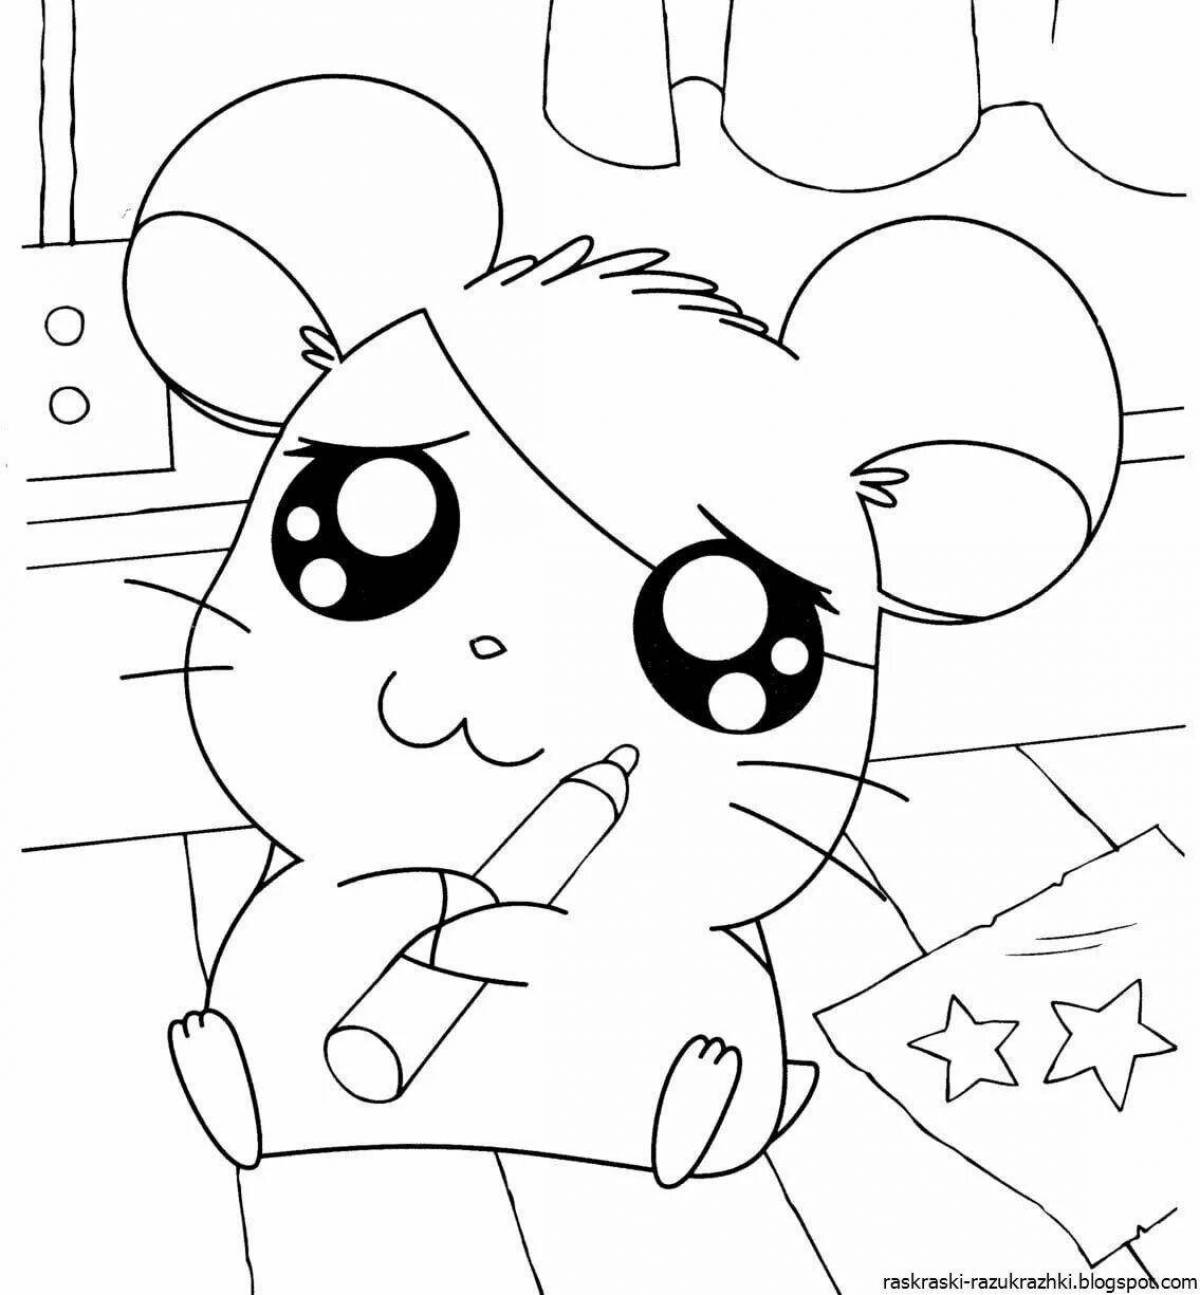 Fancy anime kittens coloring book